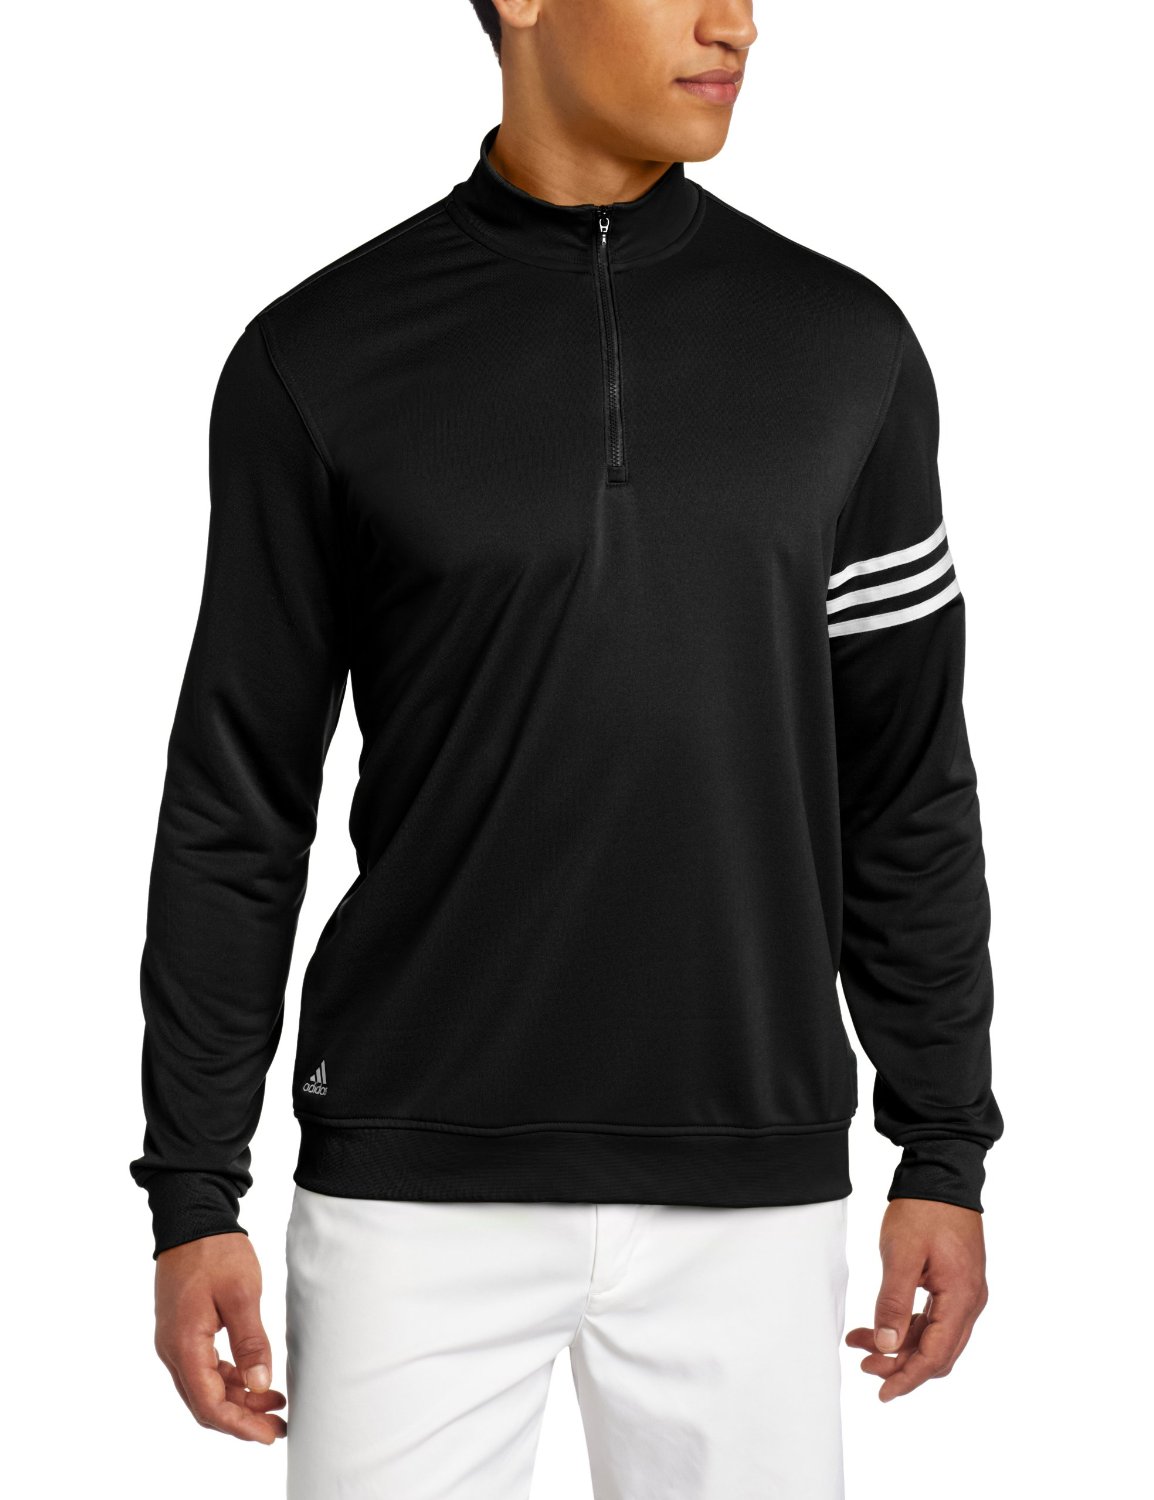 Adidas Mens Climalite 3-Stripes Golf Pullovers